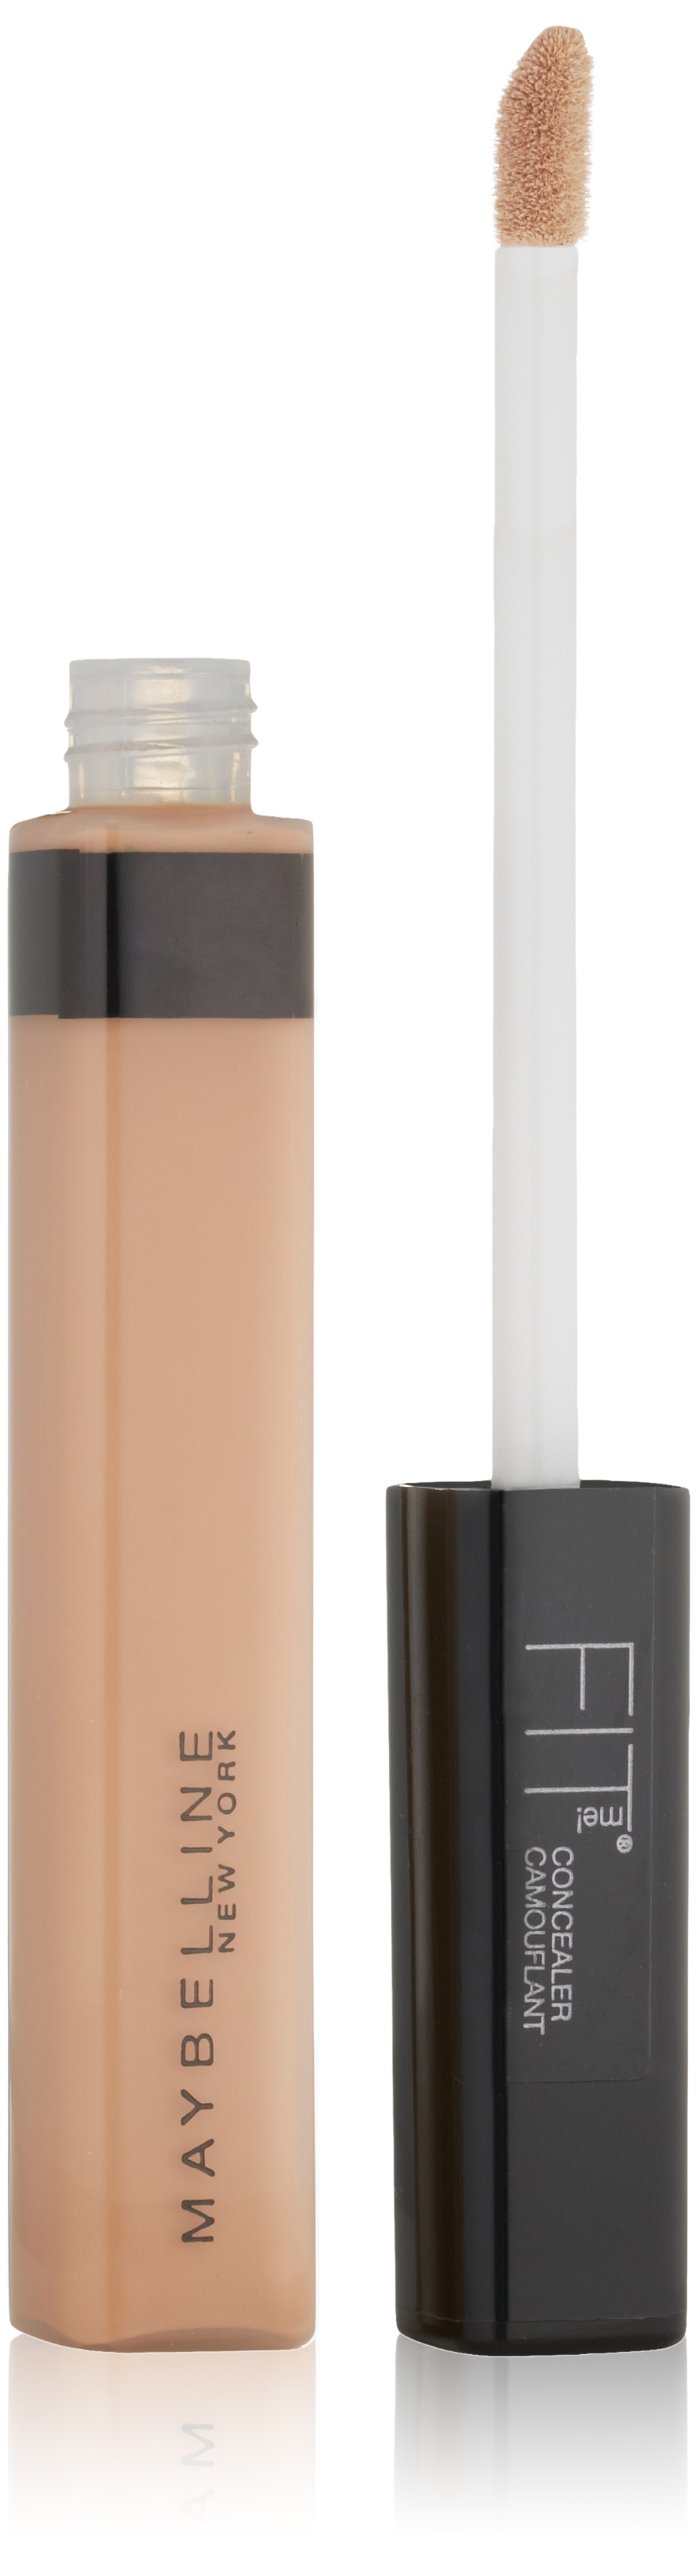 Maybelline New York Fit Me! Concealer, 35 Deep, 0.23 Fluid Ounce